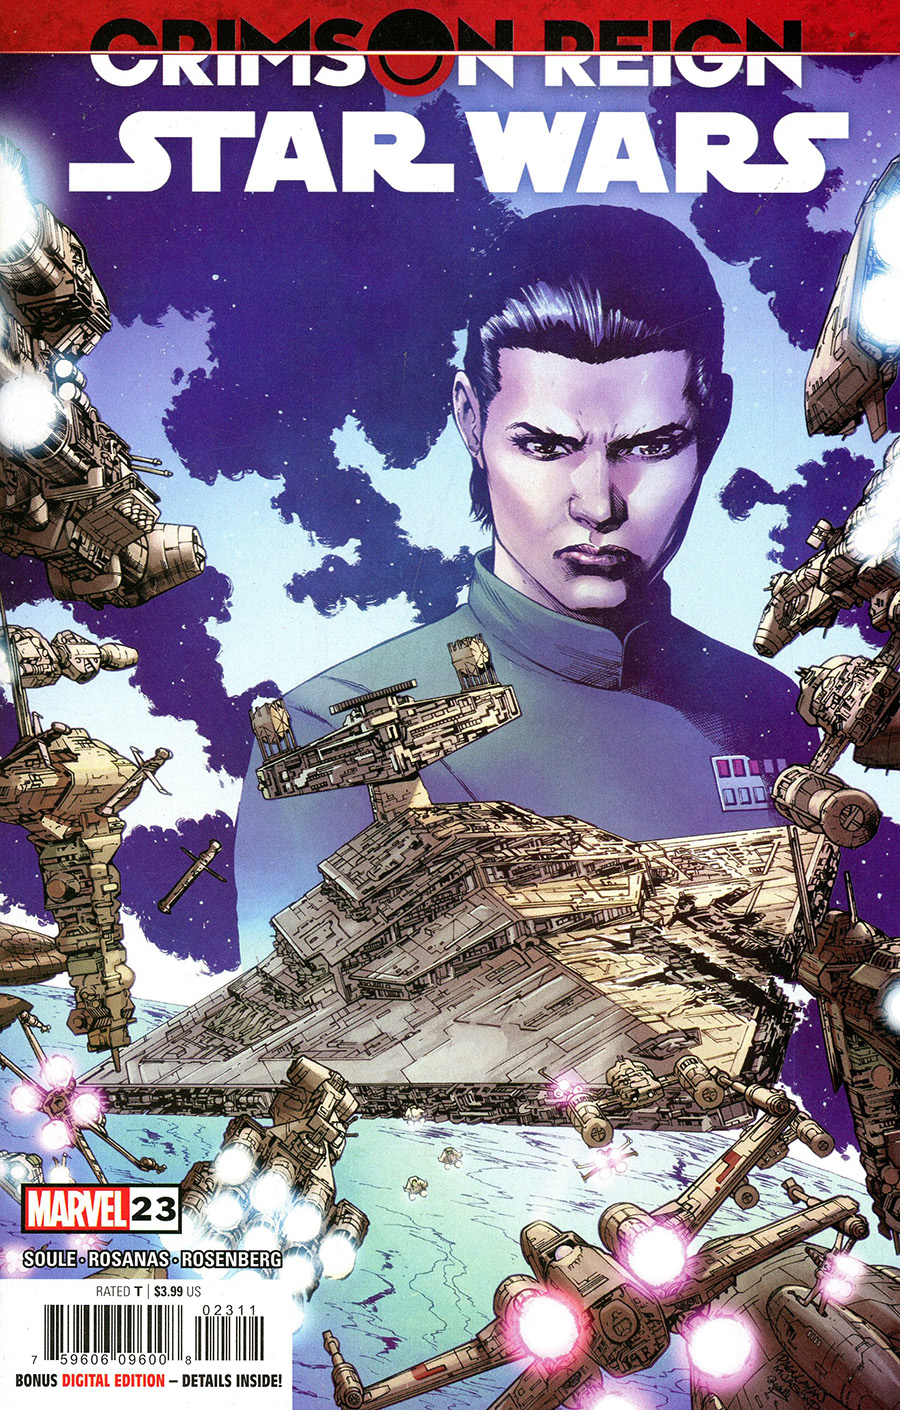 Star Wars Vol 5 #23 Cover A Regular Carlo Pagulayan Cover